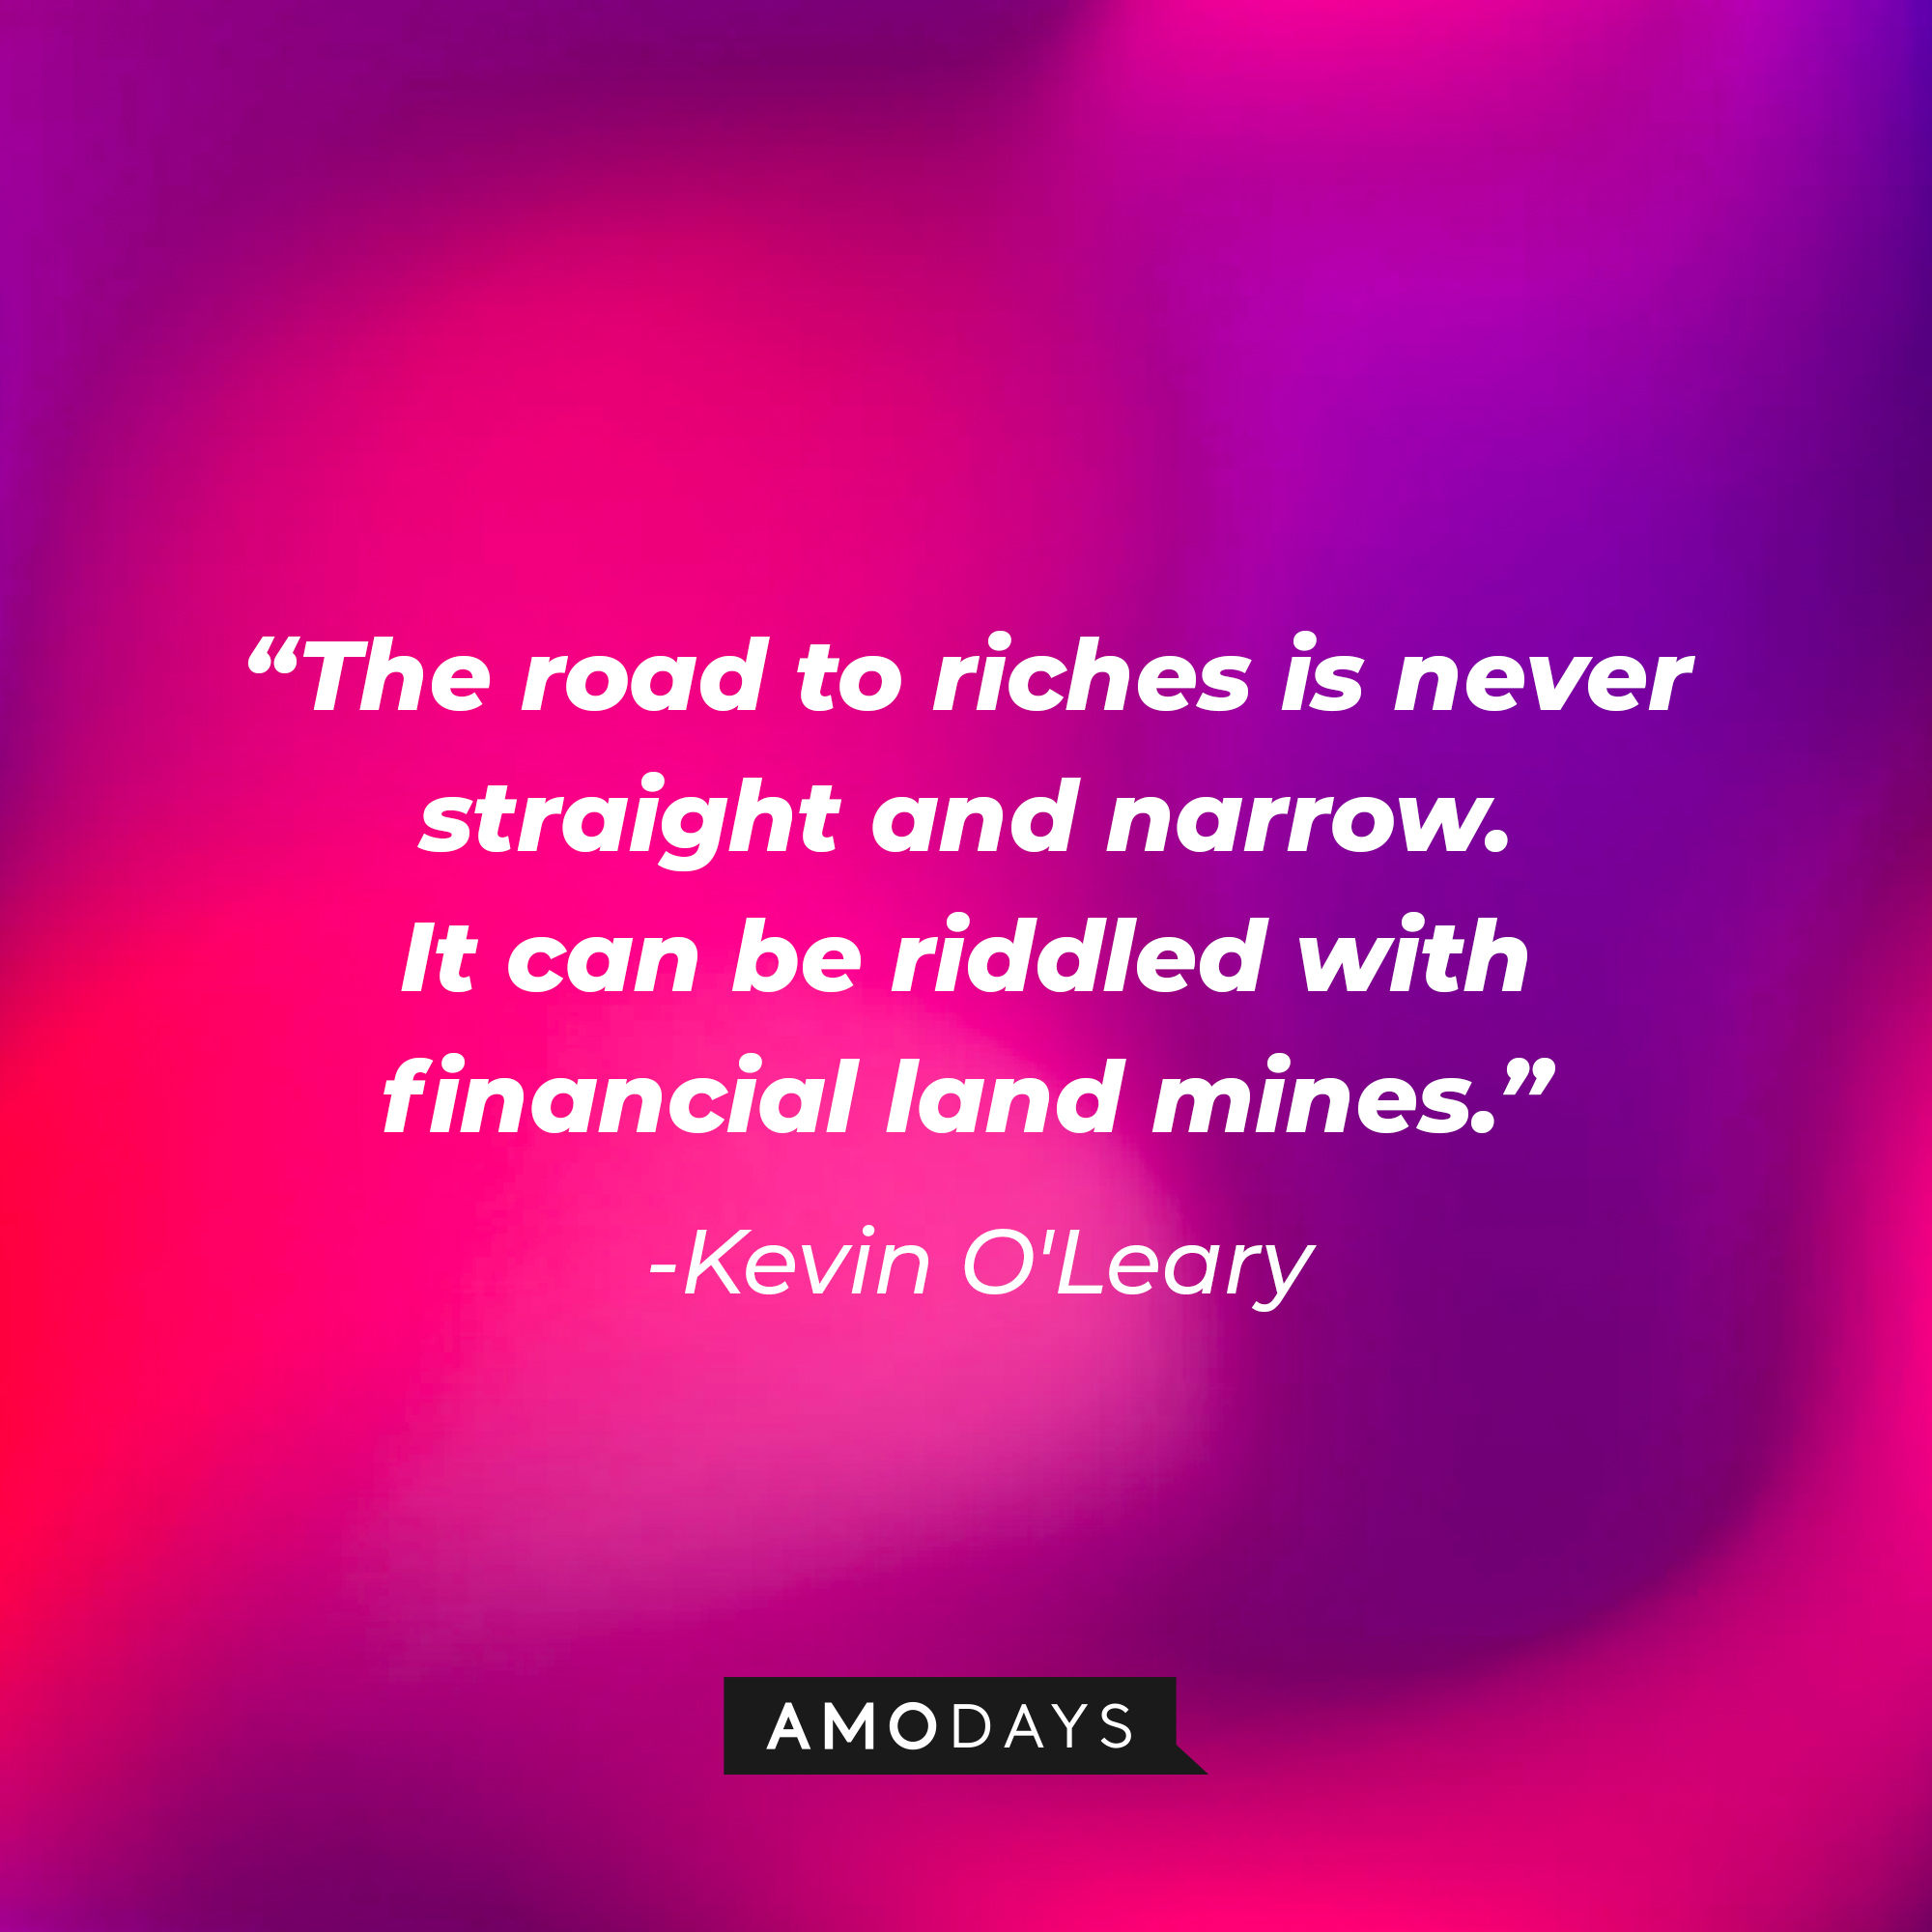 A photo with Kevin O'Leary's quote, "The road to riches is never straight and narrow. It can be riddled with financial land mines." | Source: Amodays